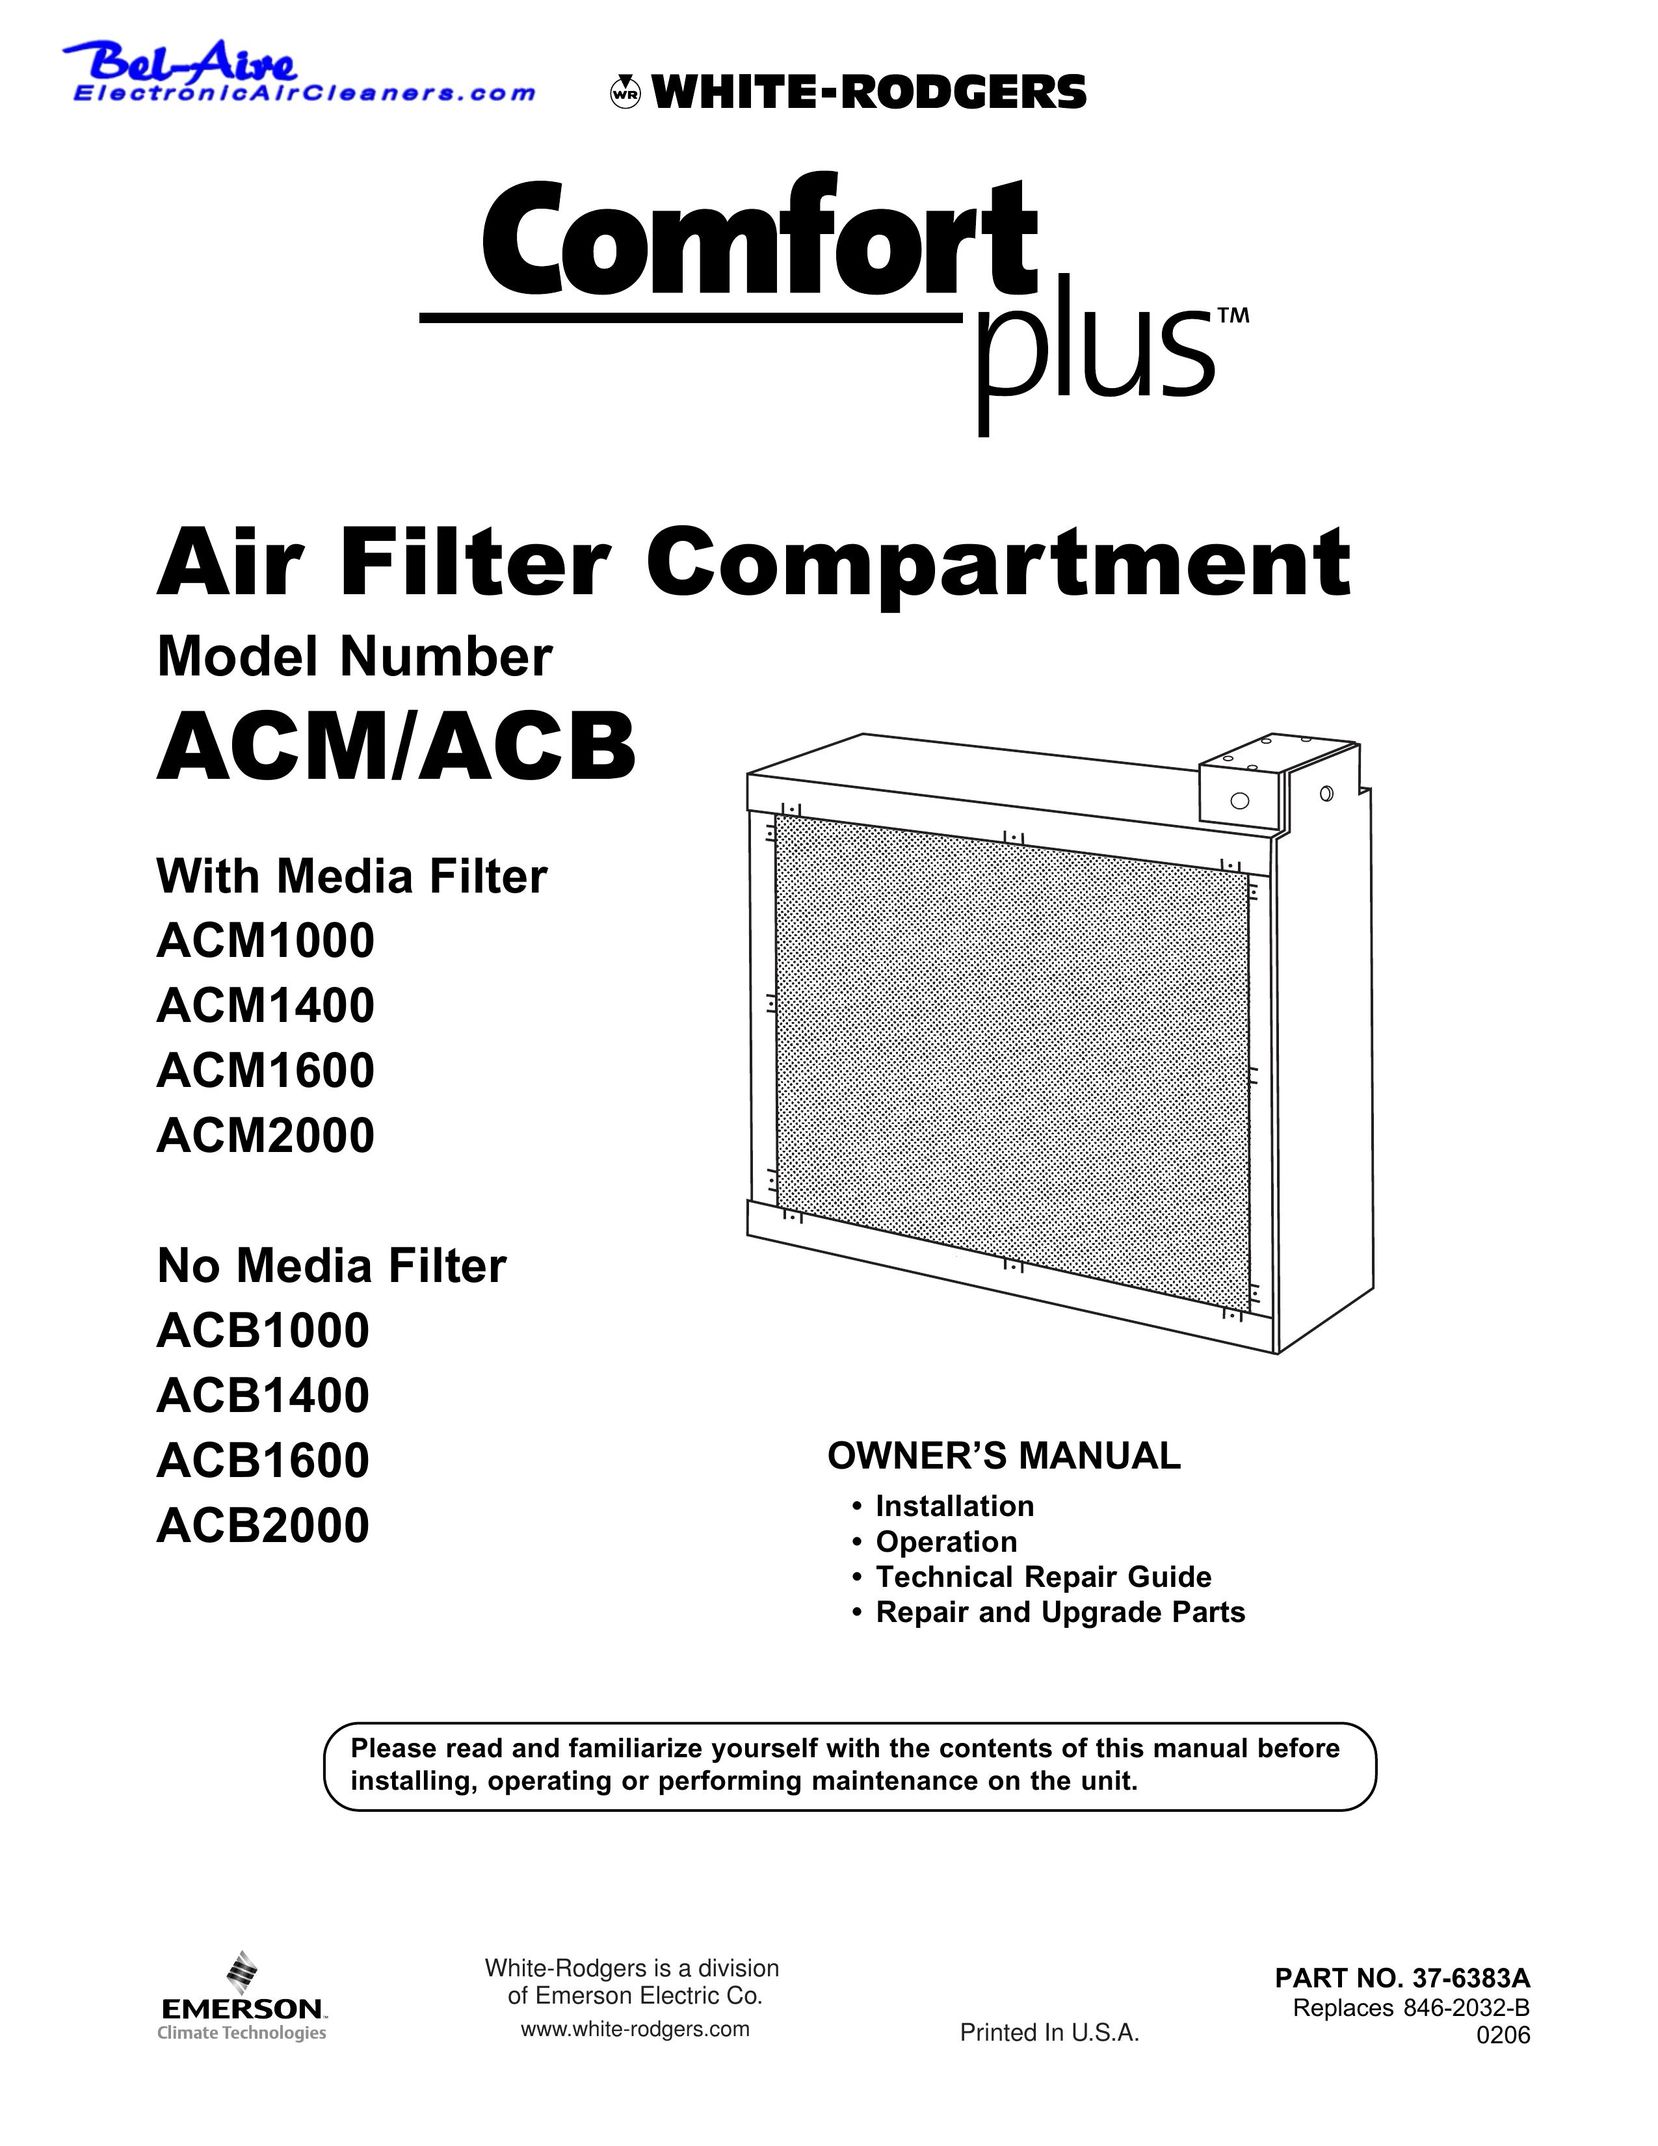 White Rodgers ACB2000 Air Cleaner User Manual